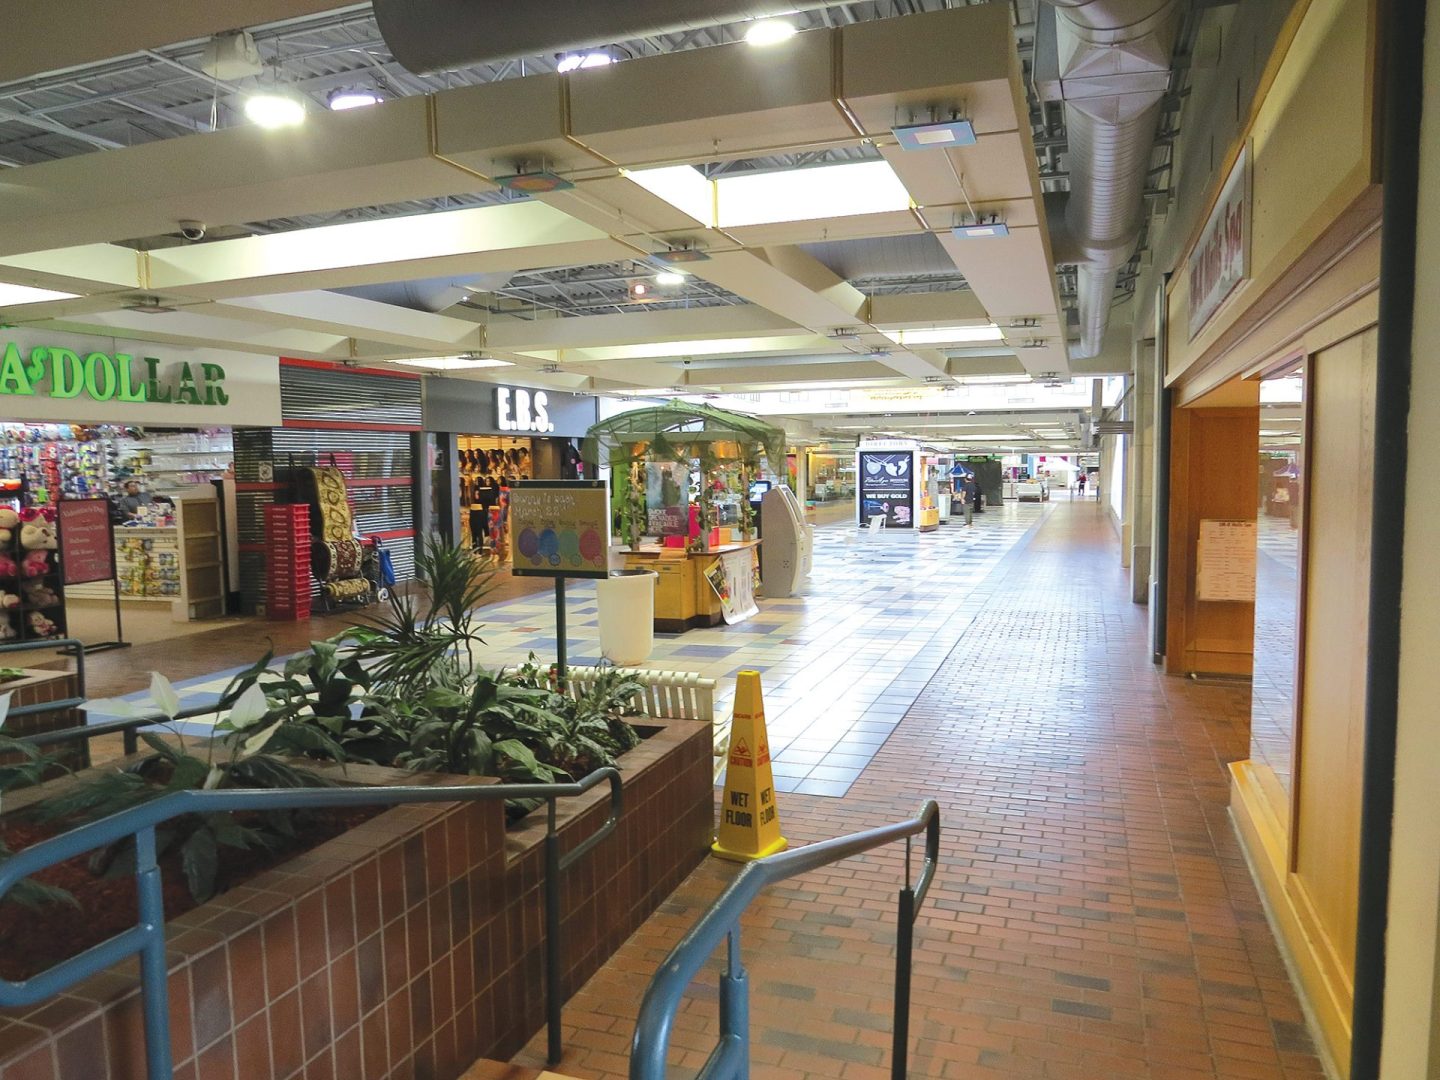 Eastfield Mall, which will be redeveloped